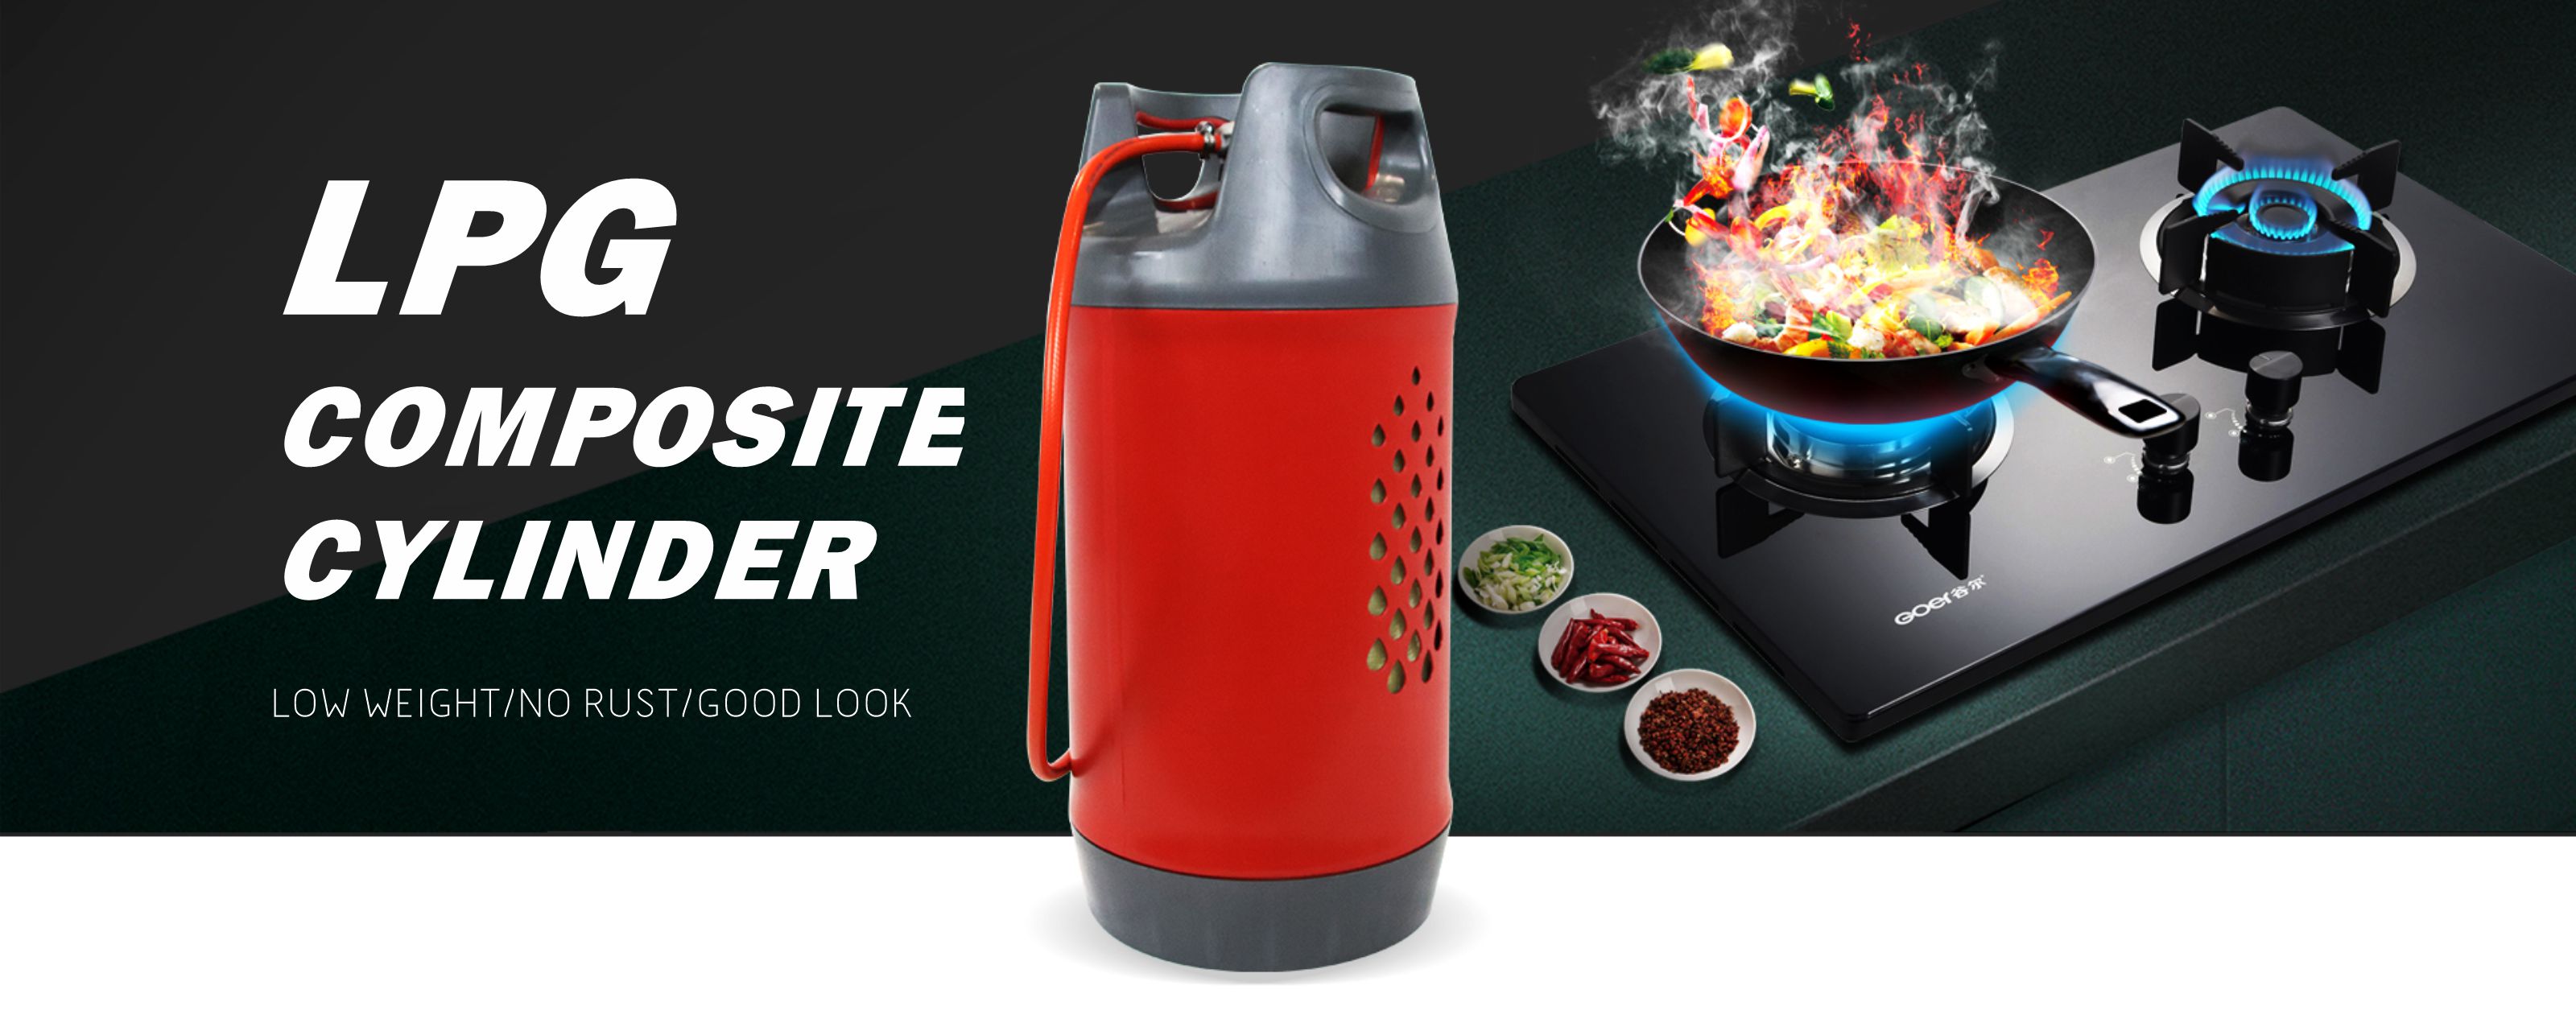 LPG Product delivery site